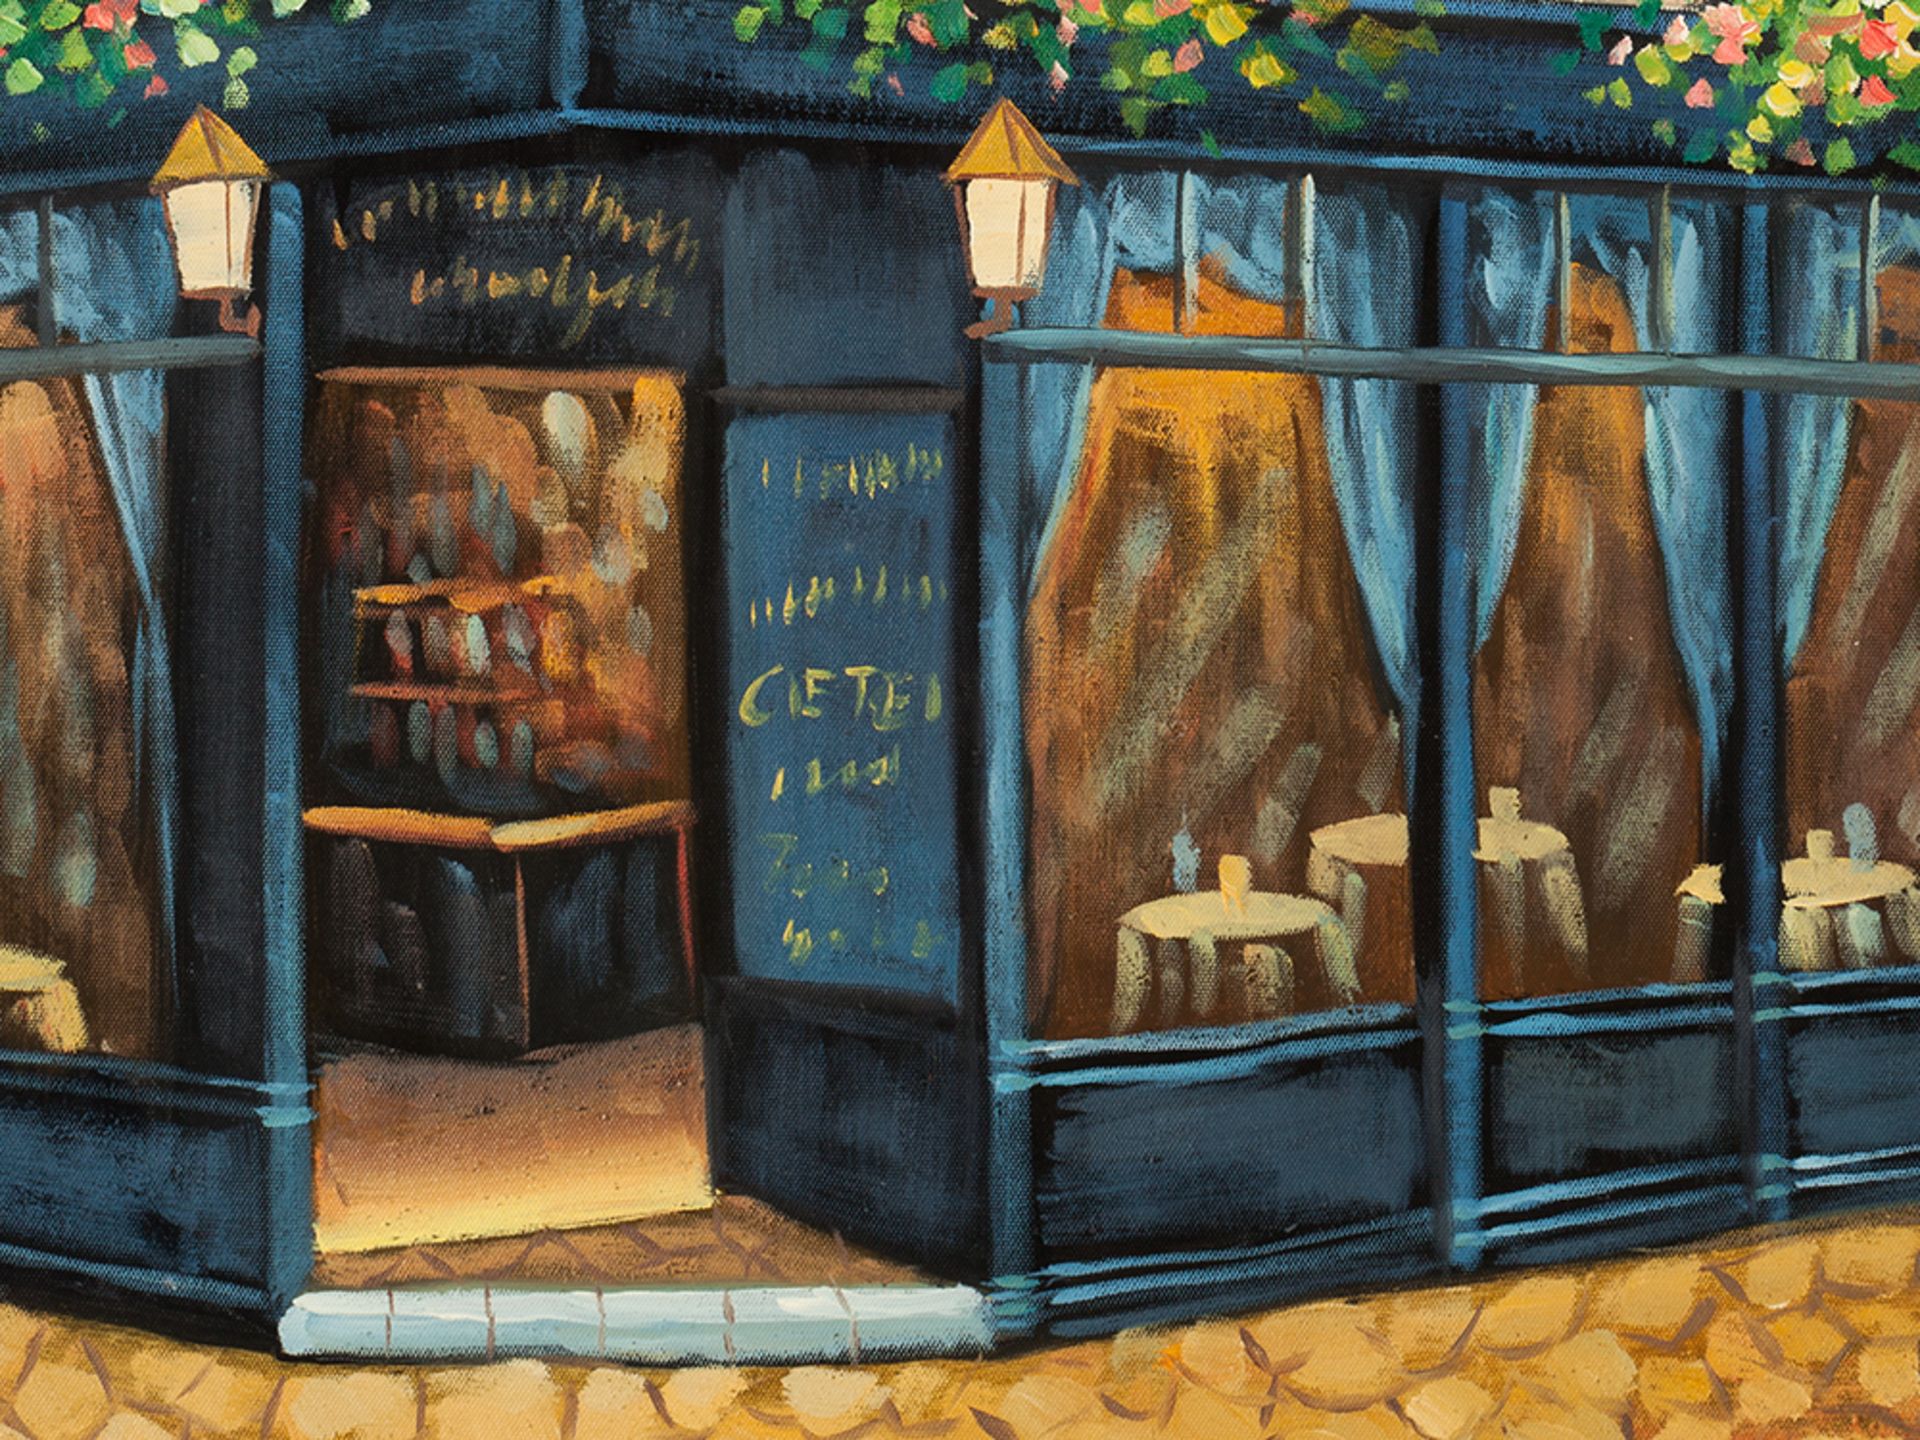 A. Wood, Oil Painting, Sidewalk Cafe, England, c. 2000 - Image 4 of 7